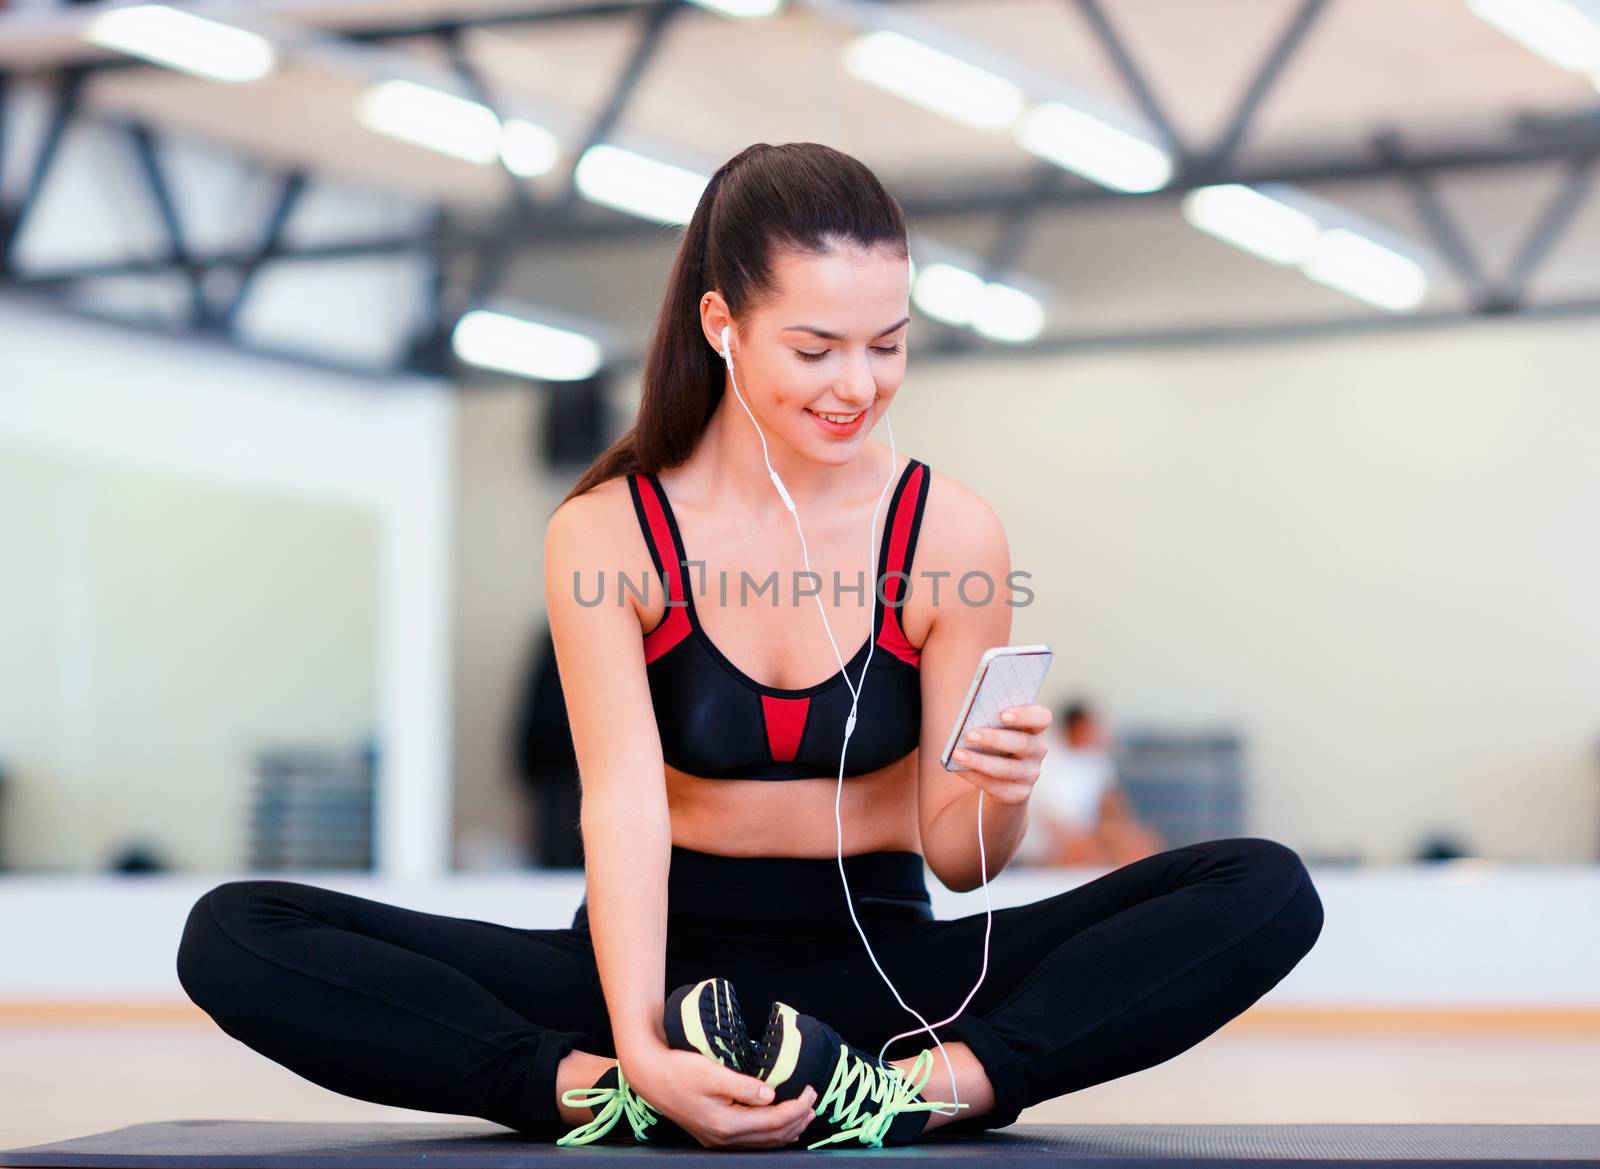 fitness, sport, training, technology and lifestyle concept - smiling woman with smartphone